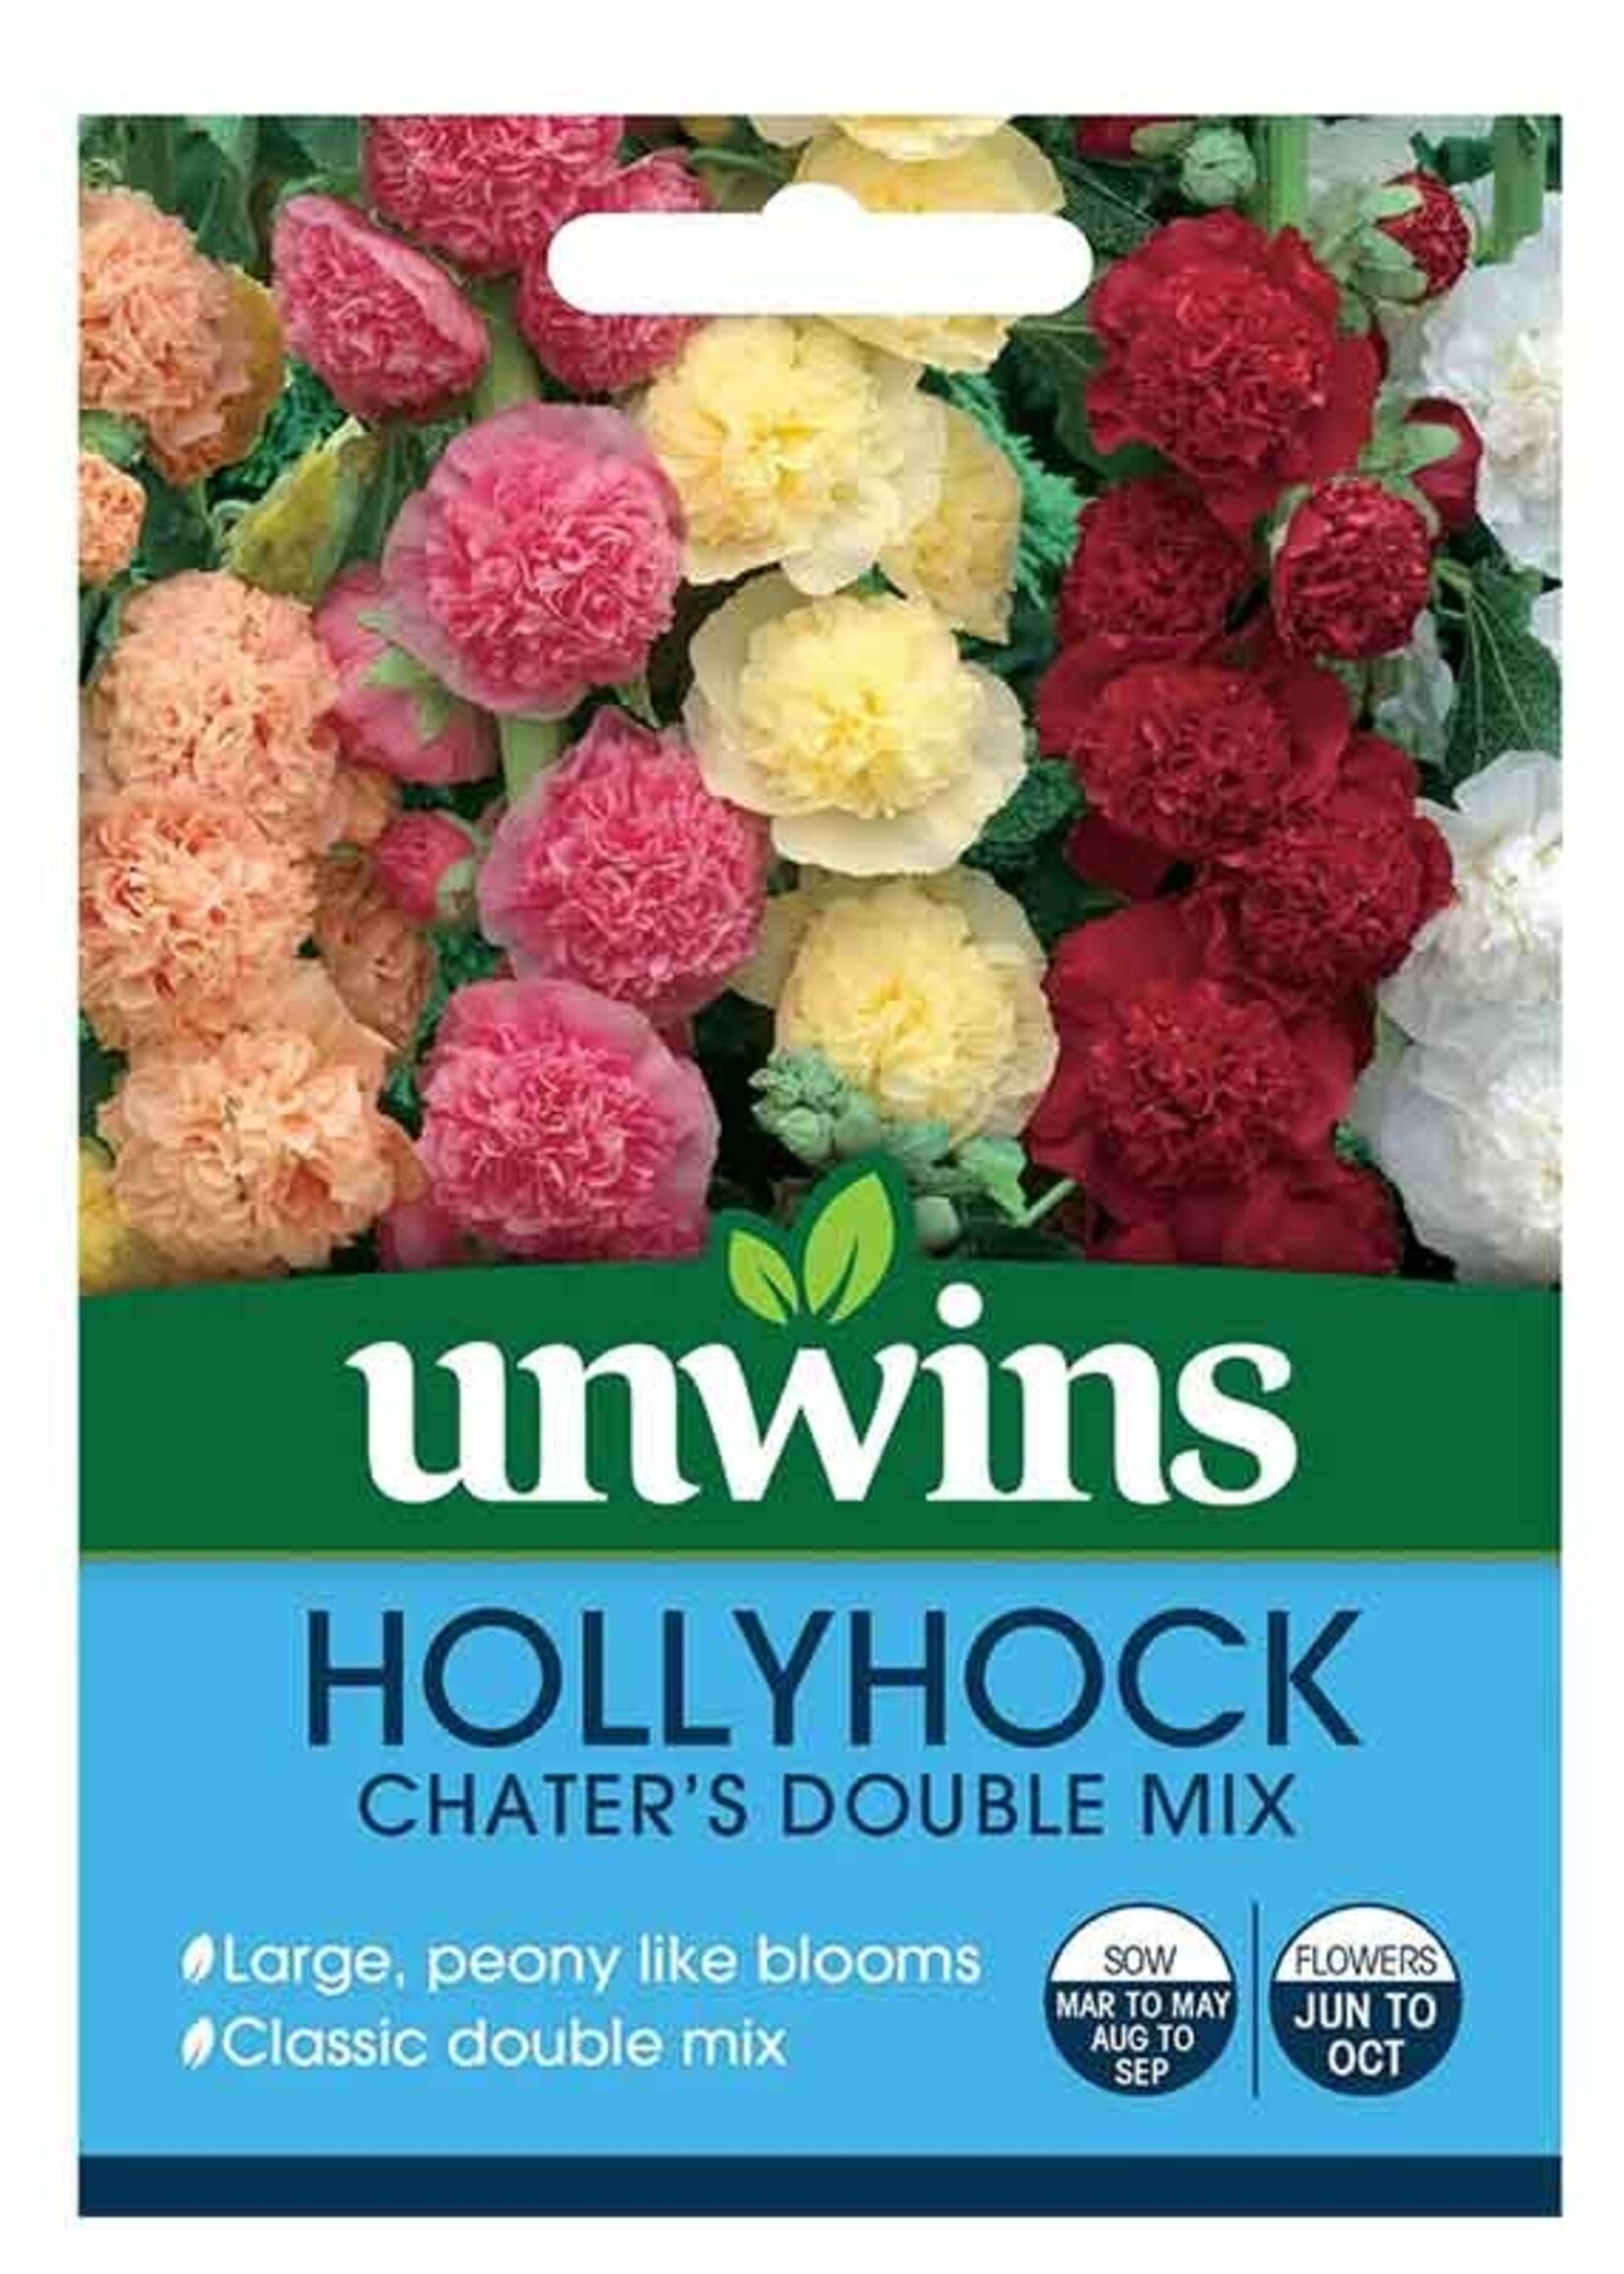 Unwins Hollyhock - Chater's Double Mix